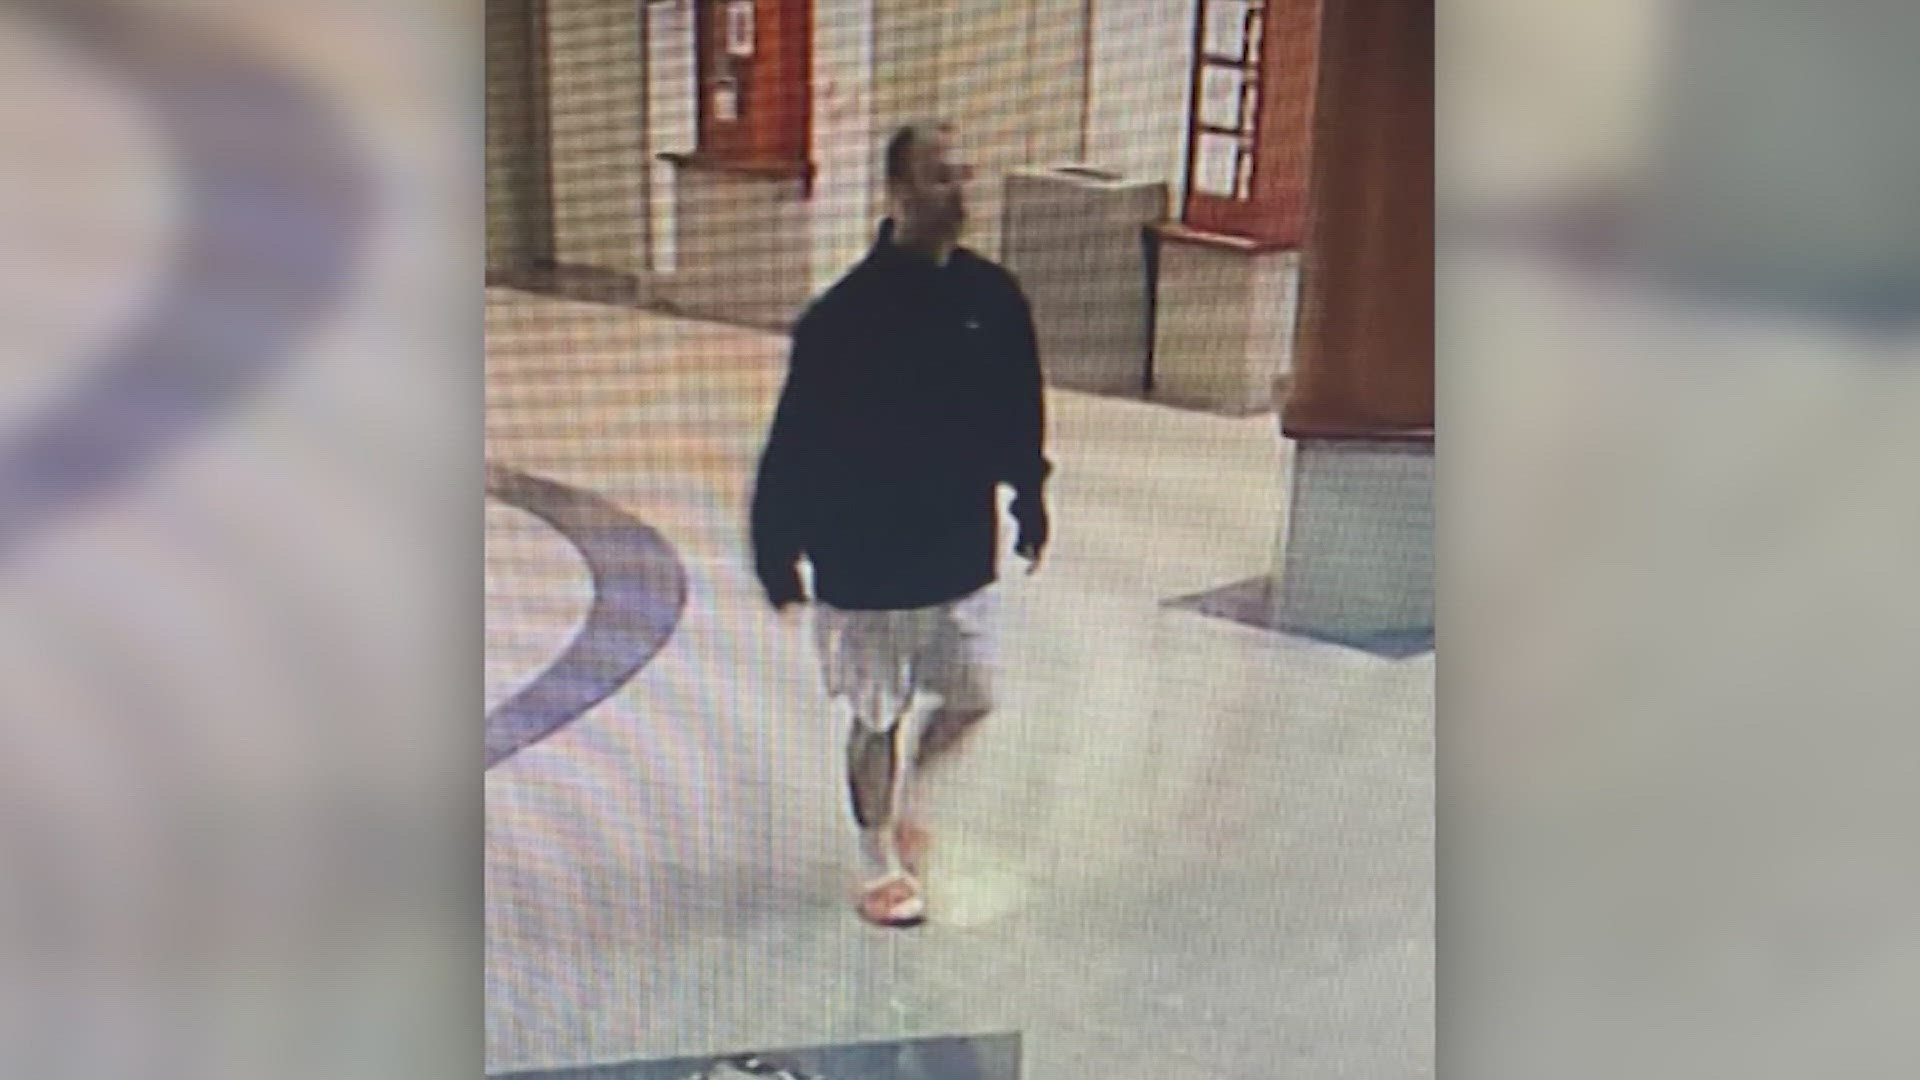 Tommy Wayne Boyd was transported yesterday to the hospital from the Potosi correctional facility for treatment. Hospital staff says he was last seen before 4 a.m.